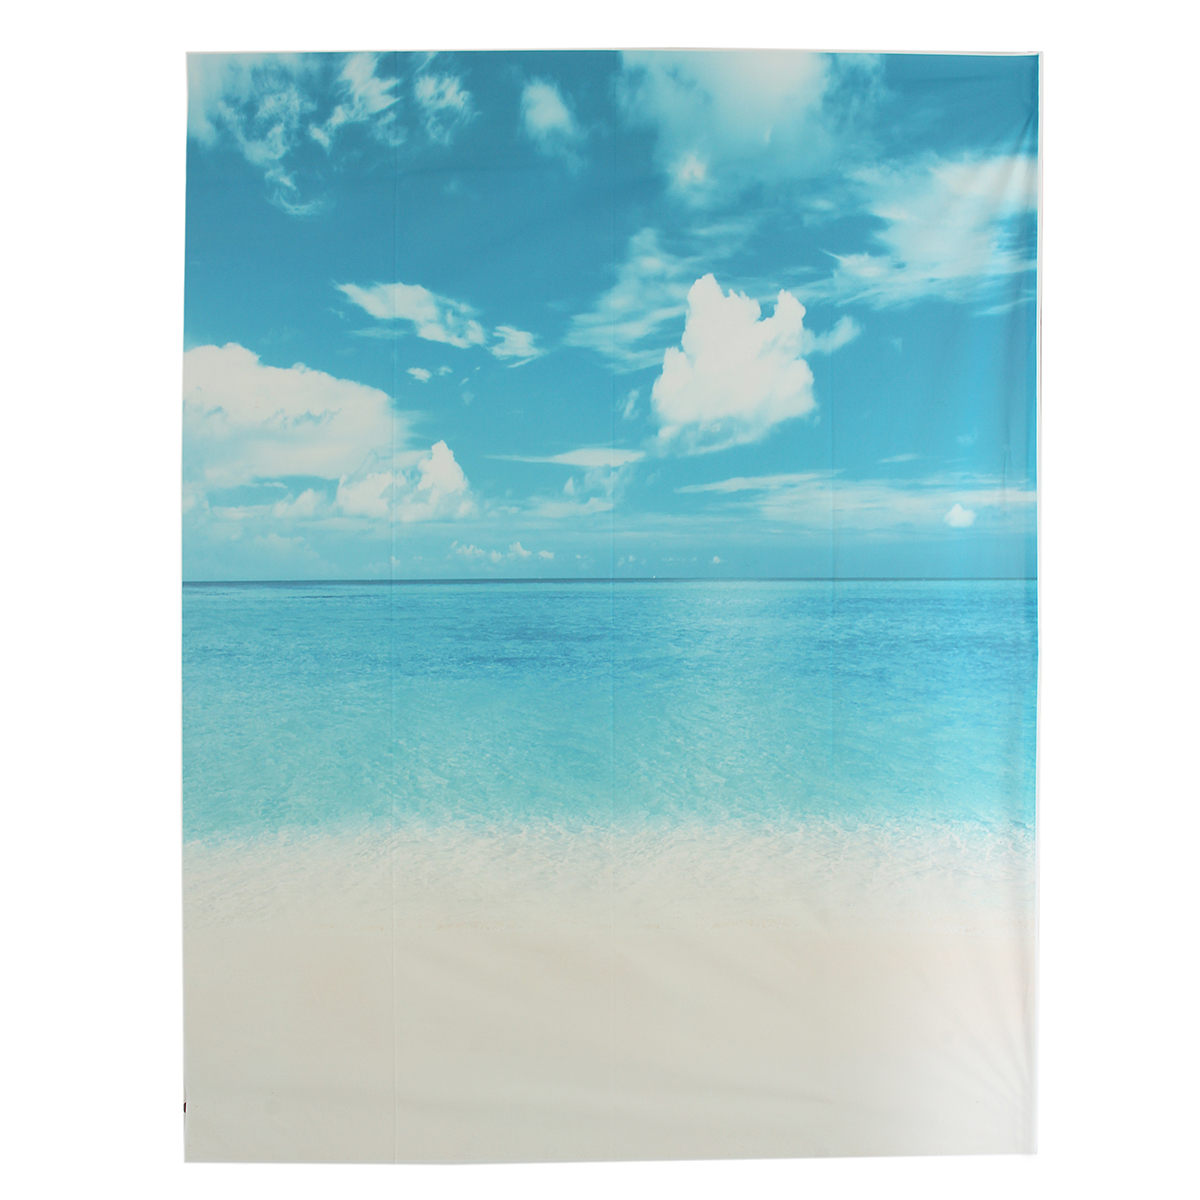 New-Durable-5x7ft-Cotton-Photography-Backdrop-Seaside-Beach-Background-Studio-Props-1952558-9